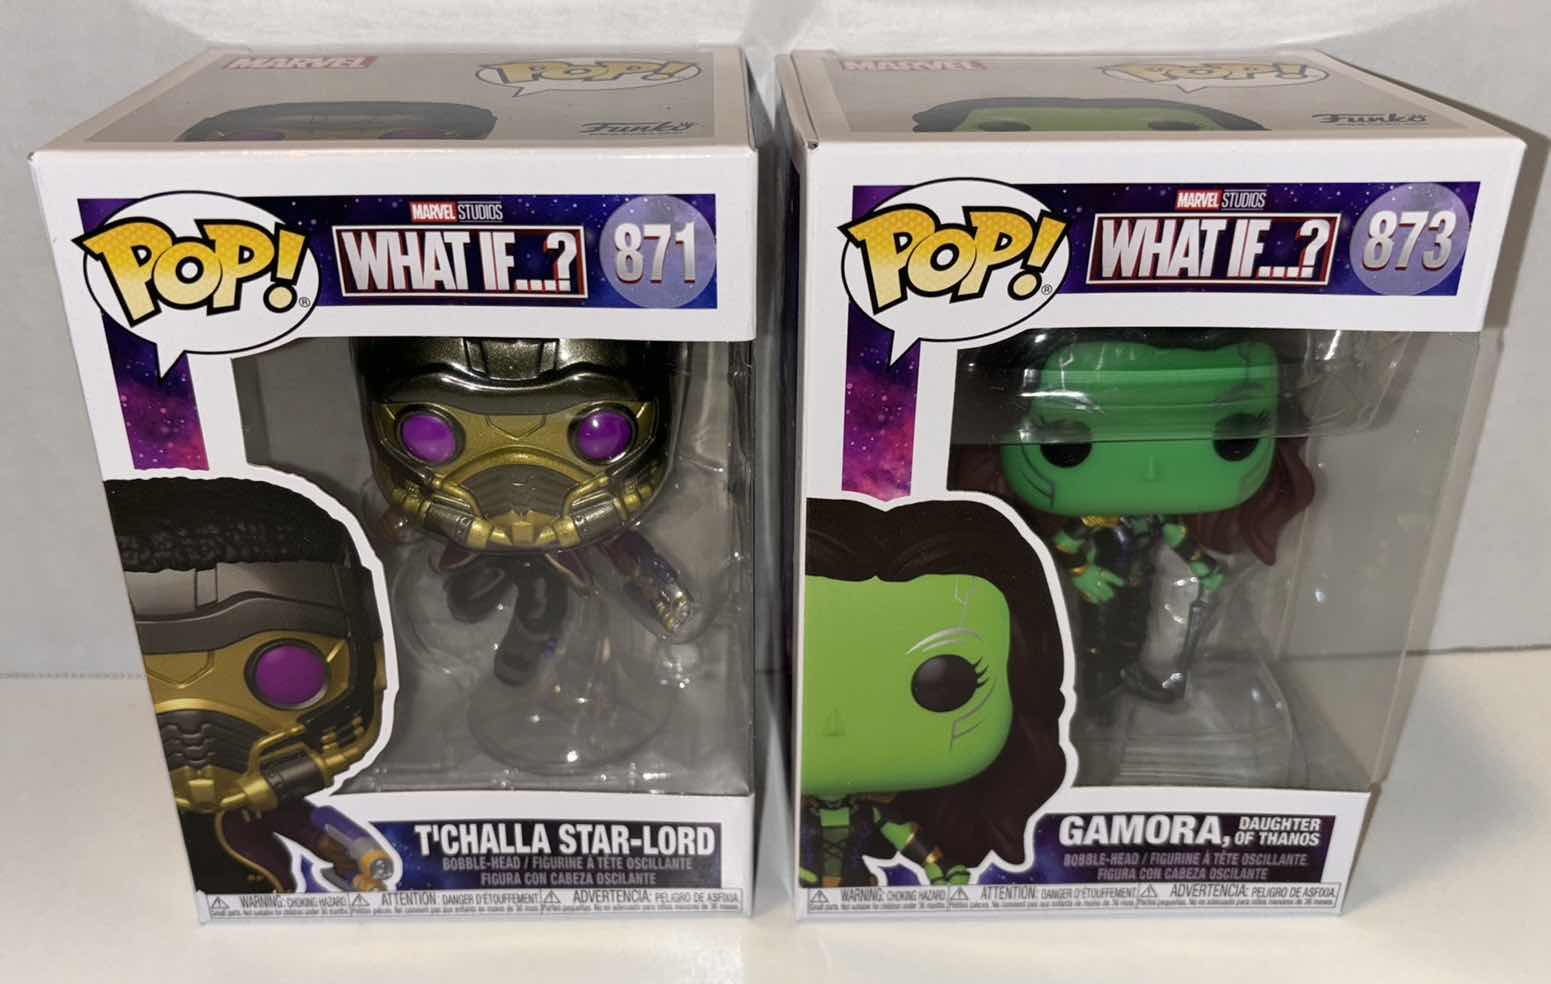 Photo 1 of NEW FUNKO POP! BOBBLE-HEAD VINYL FIGURE, 2-PACK MARVEL STUDIOS WHAT IF…? #871 T’CHALLA STAR-LORD & #873 GAMORA DAUGHTER OF THANOS